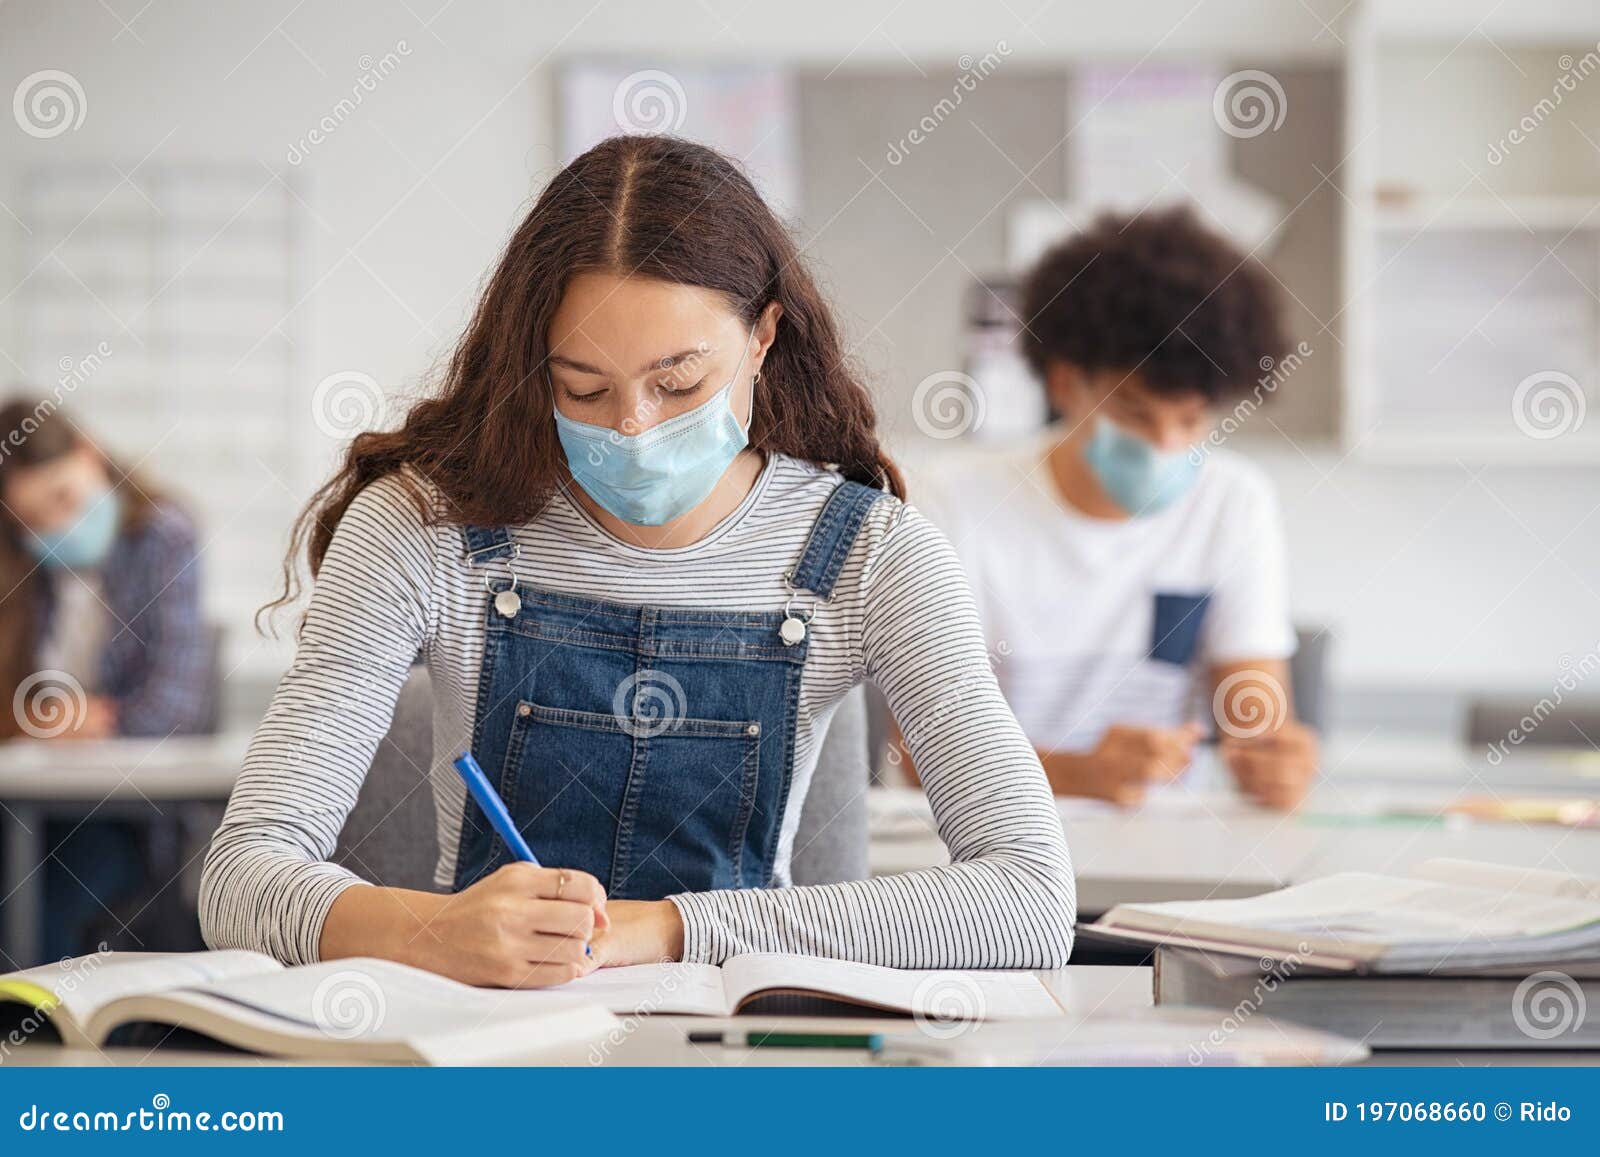 high school girl studying in class with face mask